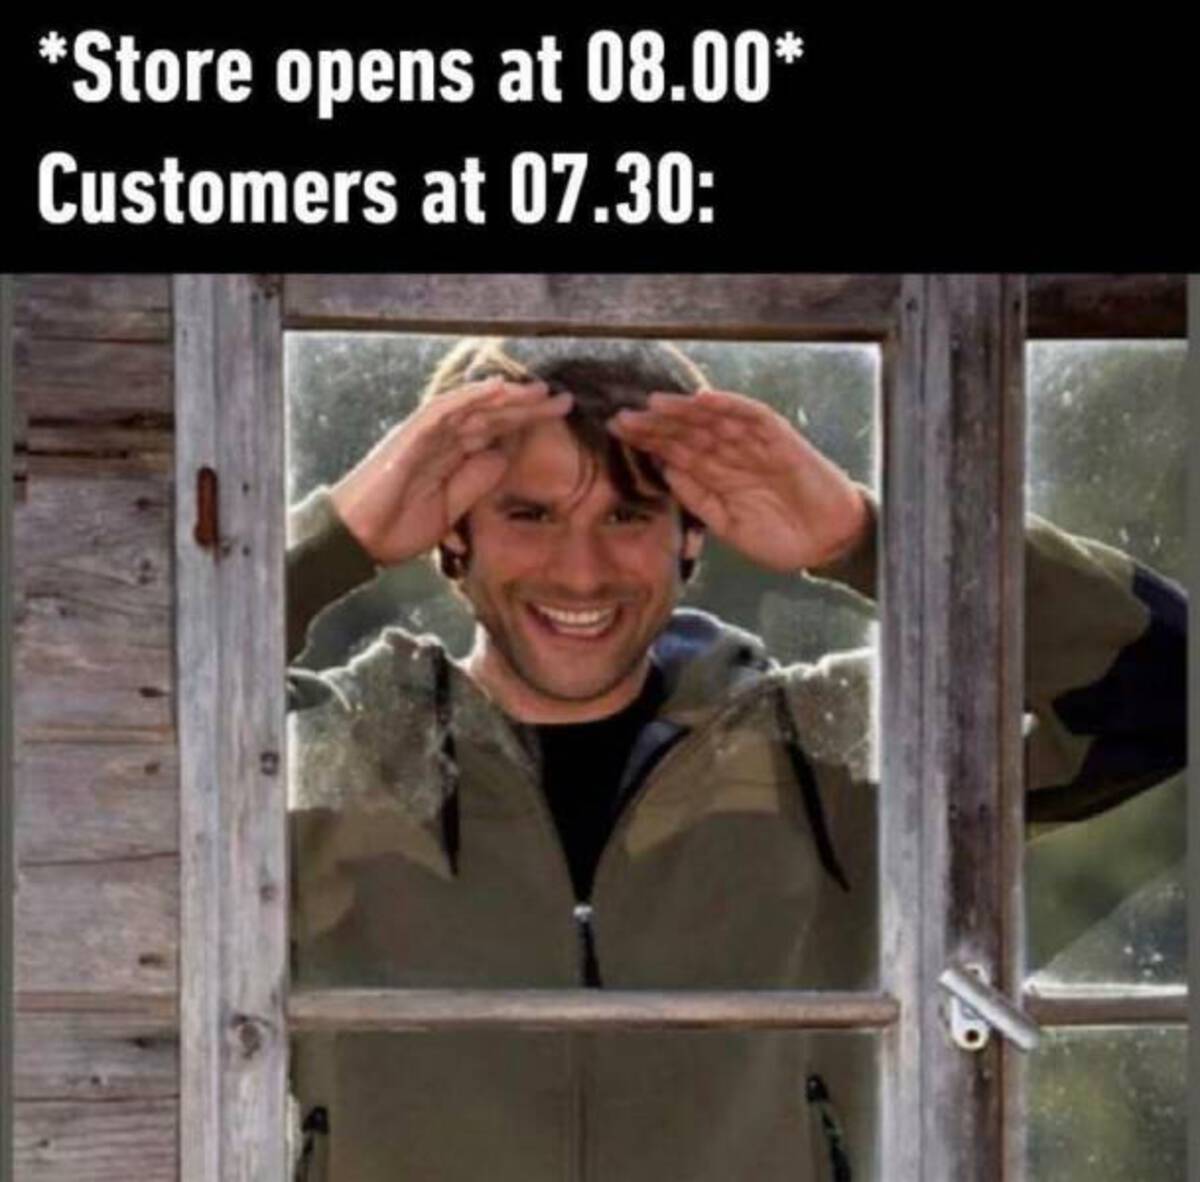 photo caption - Store opens at 08.00 Customers at 07.30